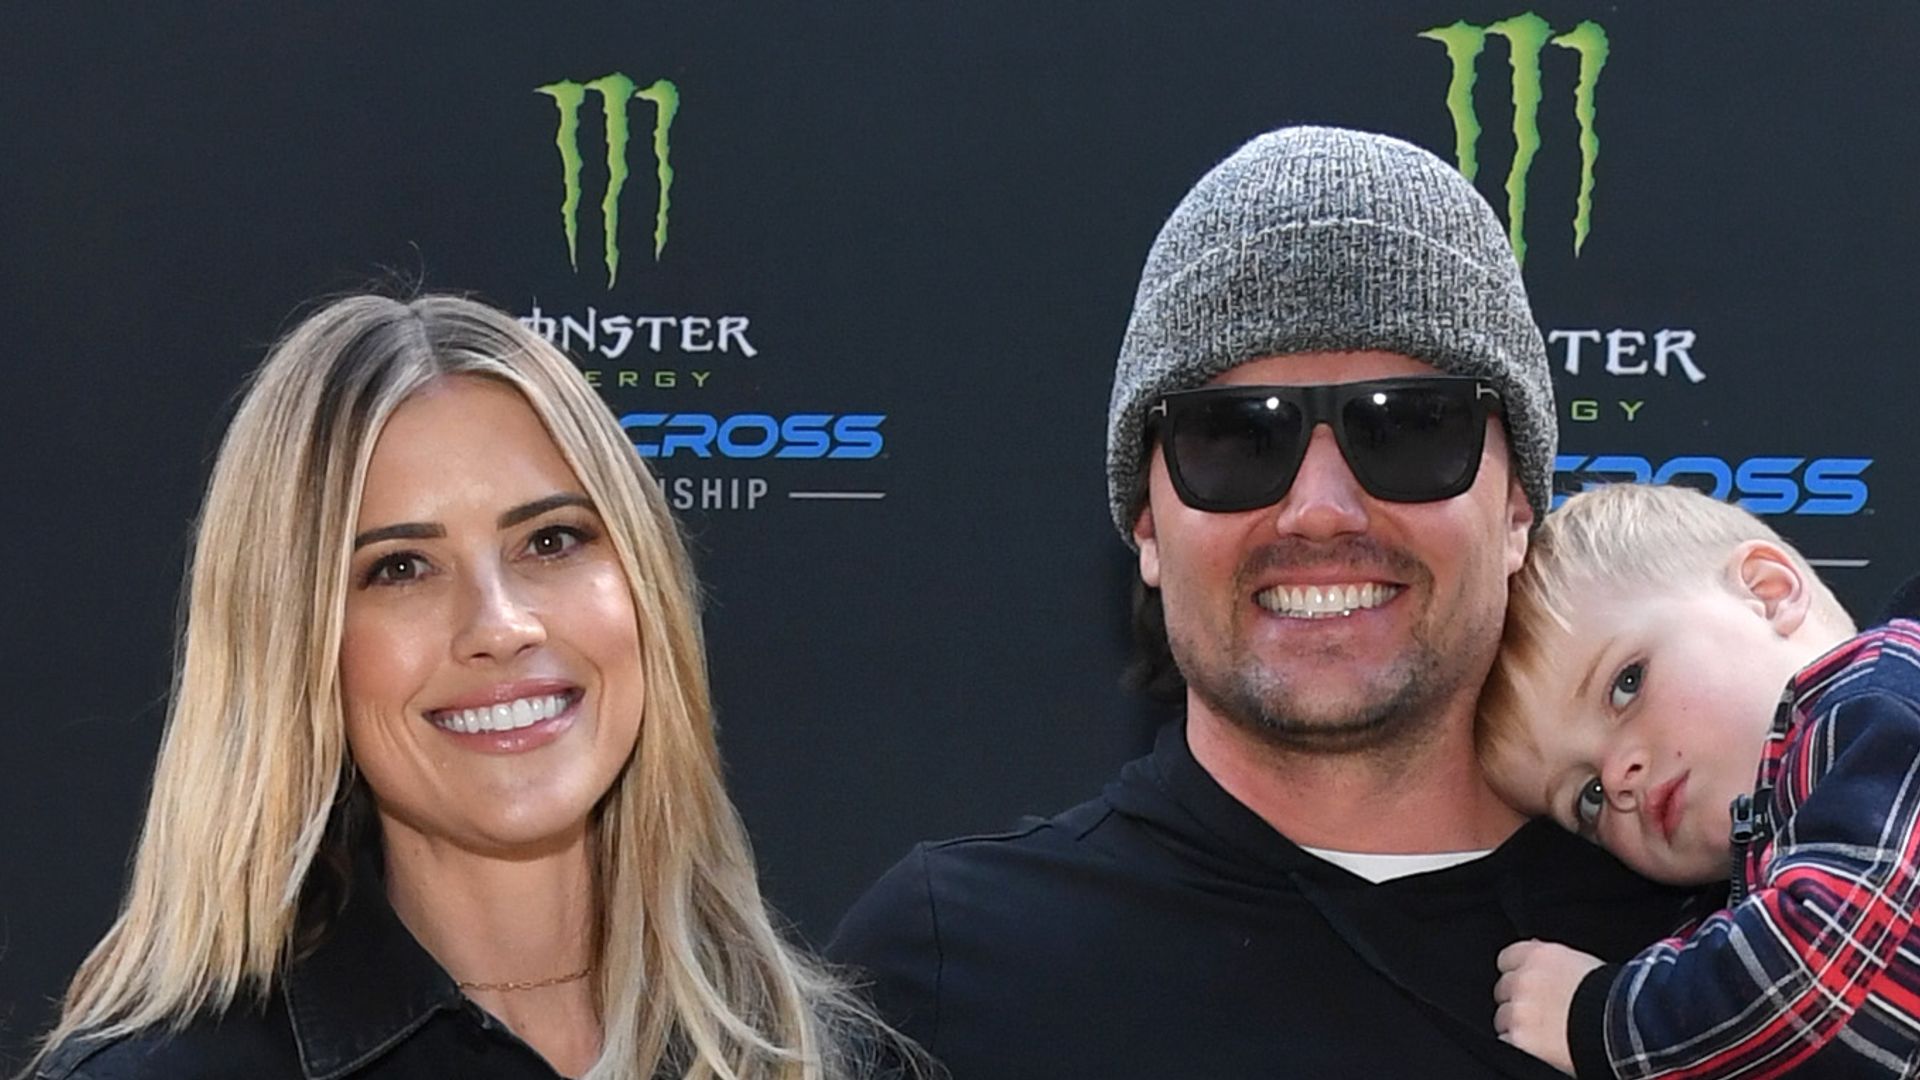 Christina Hall, Josh Hall, and guests attend Monster Energy Supercross Celebrity Night at Angel Stadium of Anaheim on January 28, 2023 in Anaheim, California